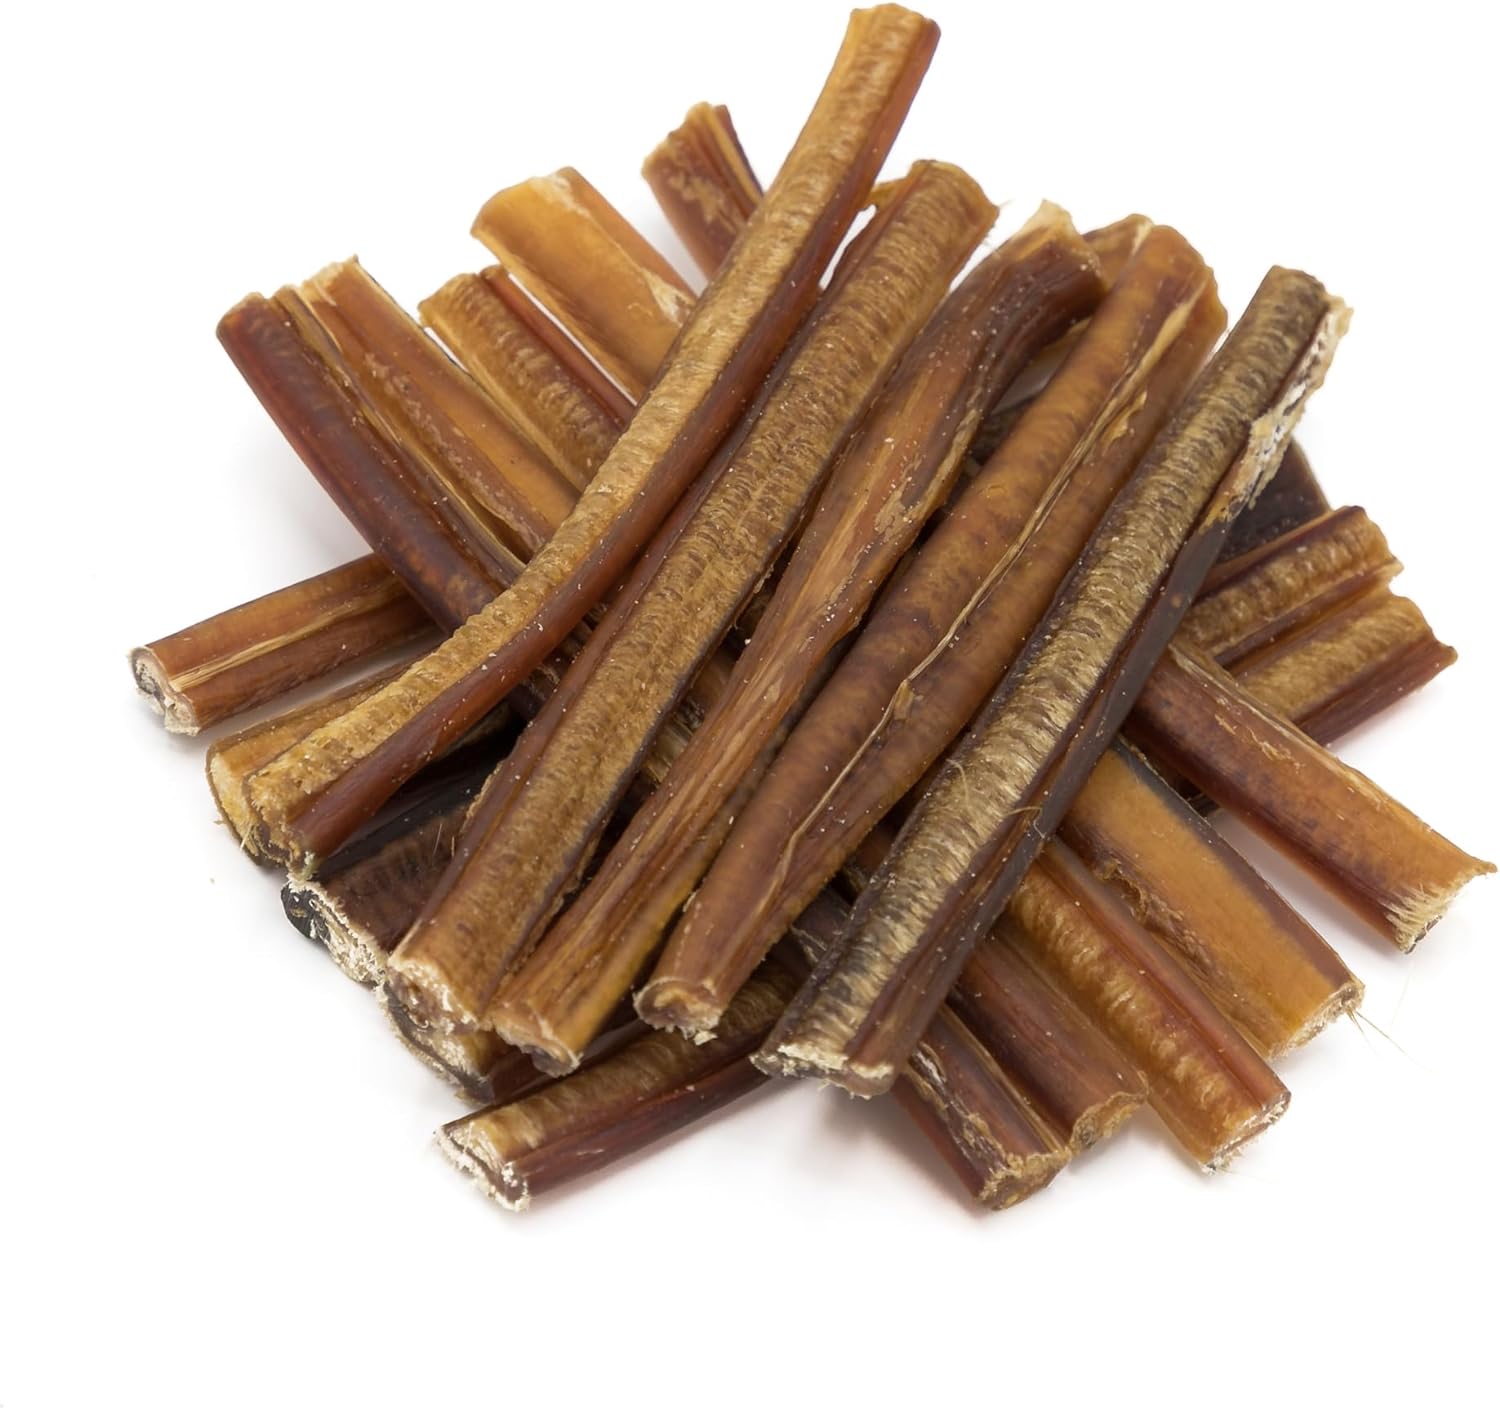 Best Bully Sticks 6 Inch All-Natural Bully Sticks for Dogs - 6” Fully Digestible, 100% Grass-Fed Beef, Grain and Rawhide Free | 50 Pack : Pet Supplies